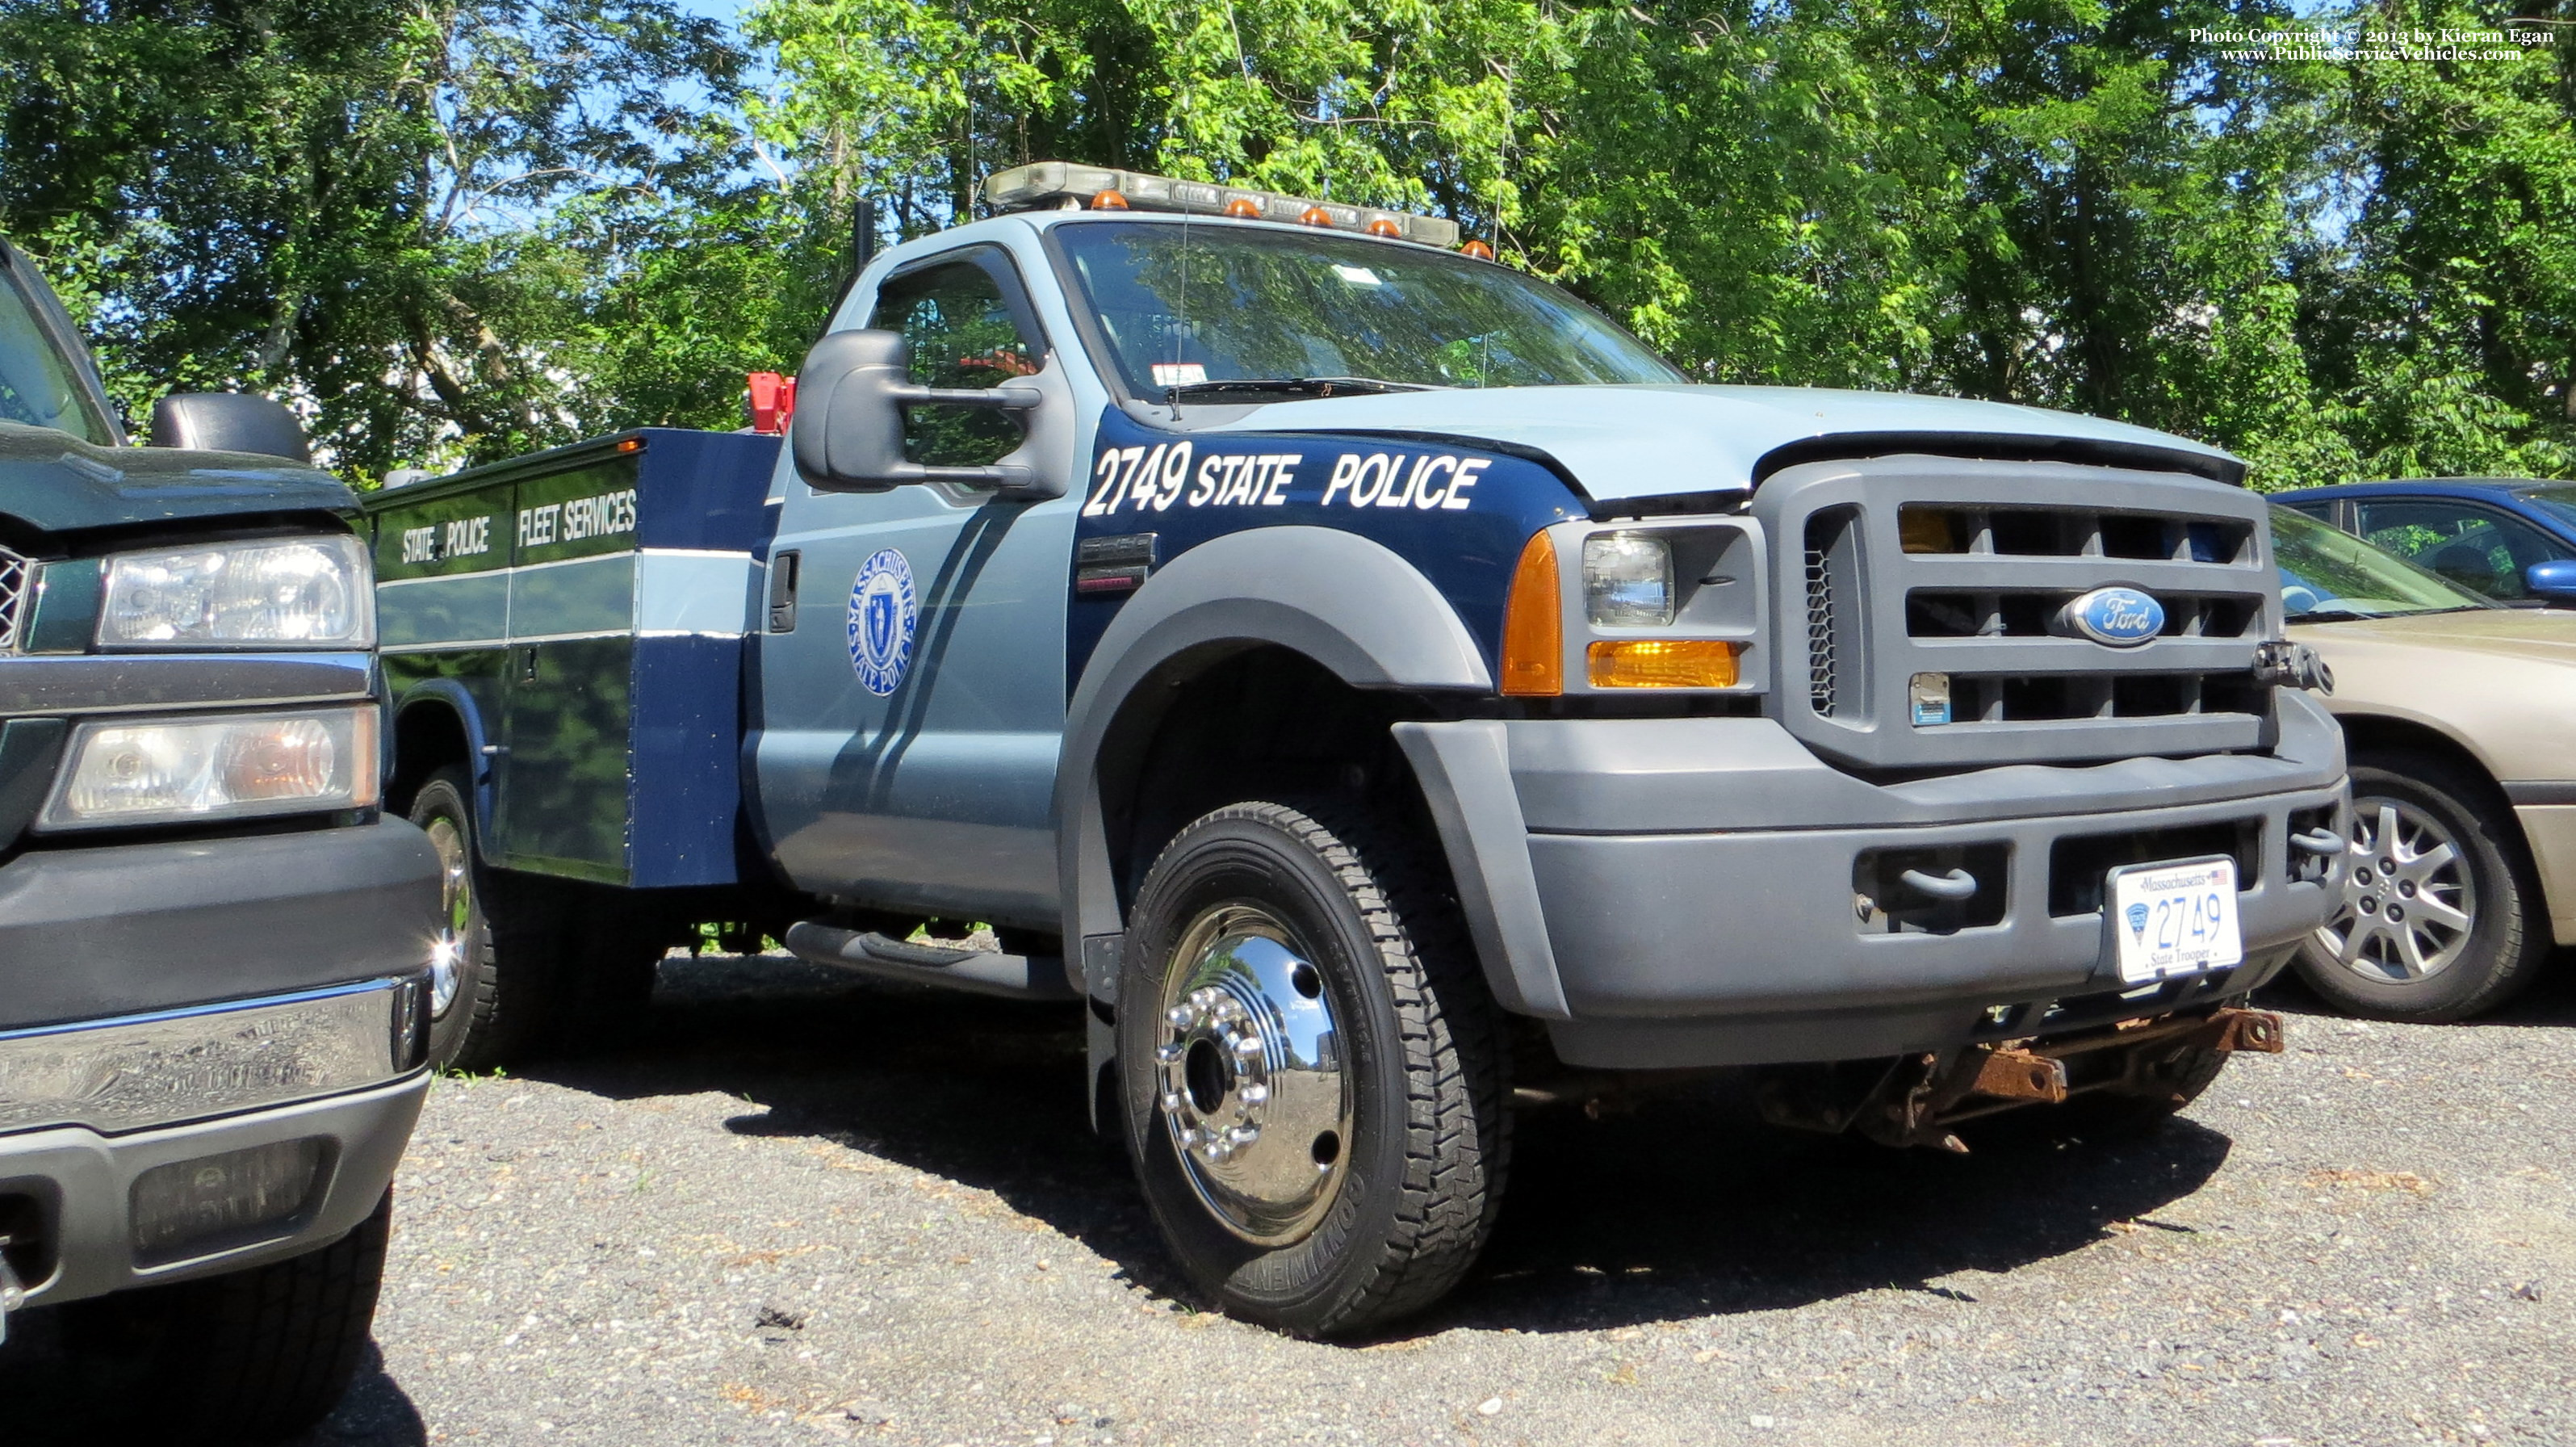 A photo  of Massachusetts State Police
            Truck 2749, a 1999-2004 Ford F-550             taken by Kieran Egan